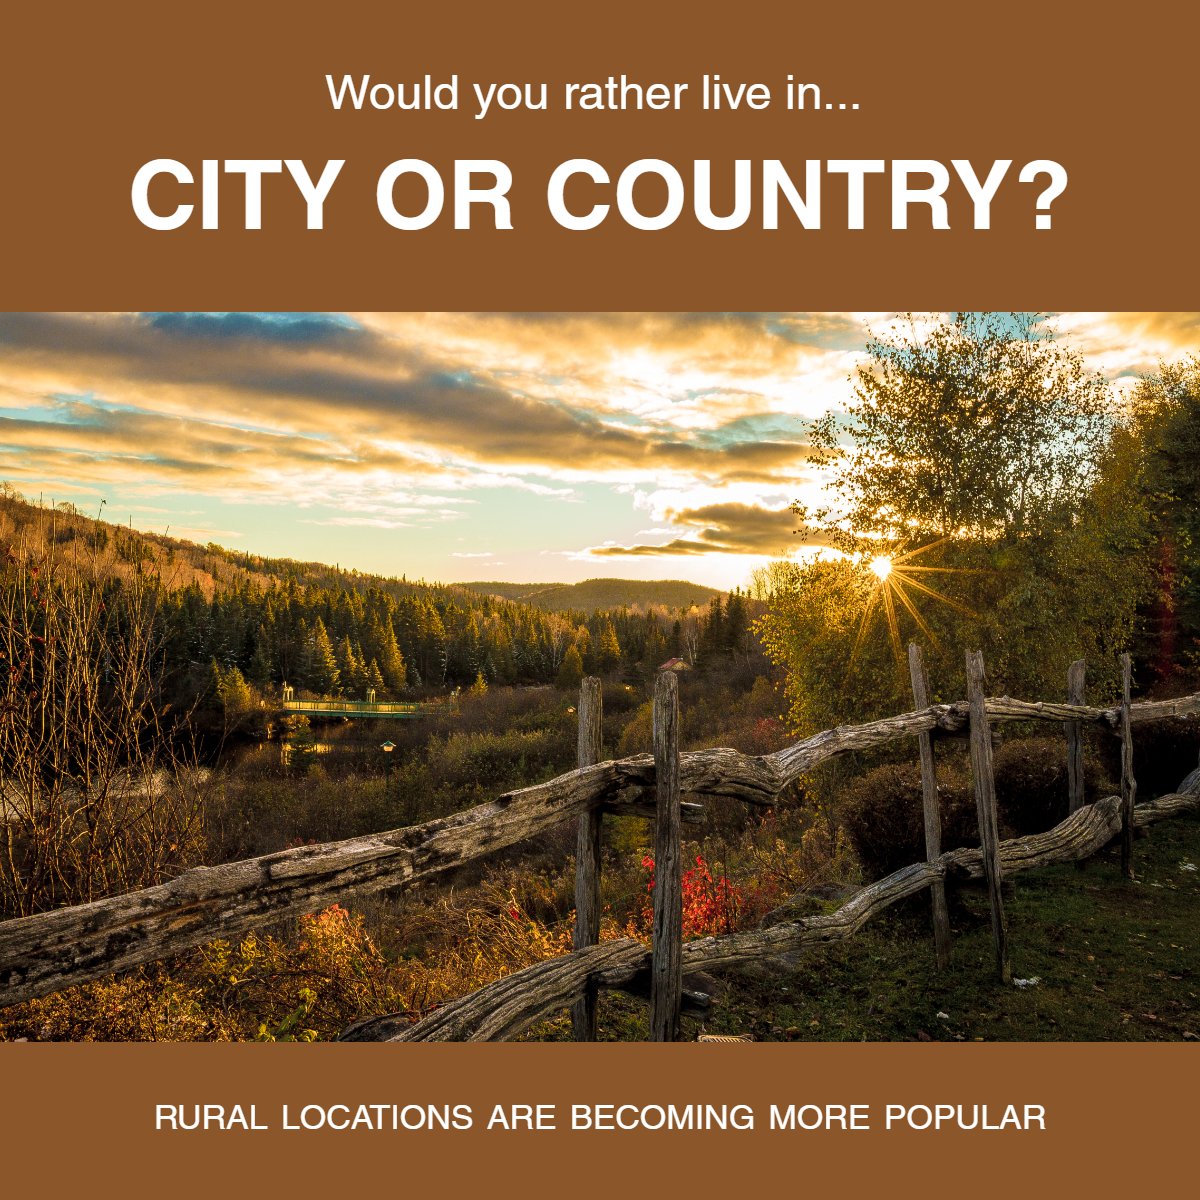 Would you rather live in the city or country? 🏙️🌄

#wouldyourather   #cityorcountry   #citylights   #realestatequestion   #realestate
#Realestate #fairlawn #paramus #saddlebrook #njrealestate #bergencounty #forsalebuyowner #propertymanagement #homeseller